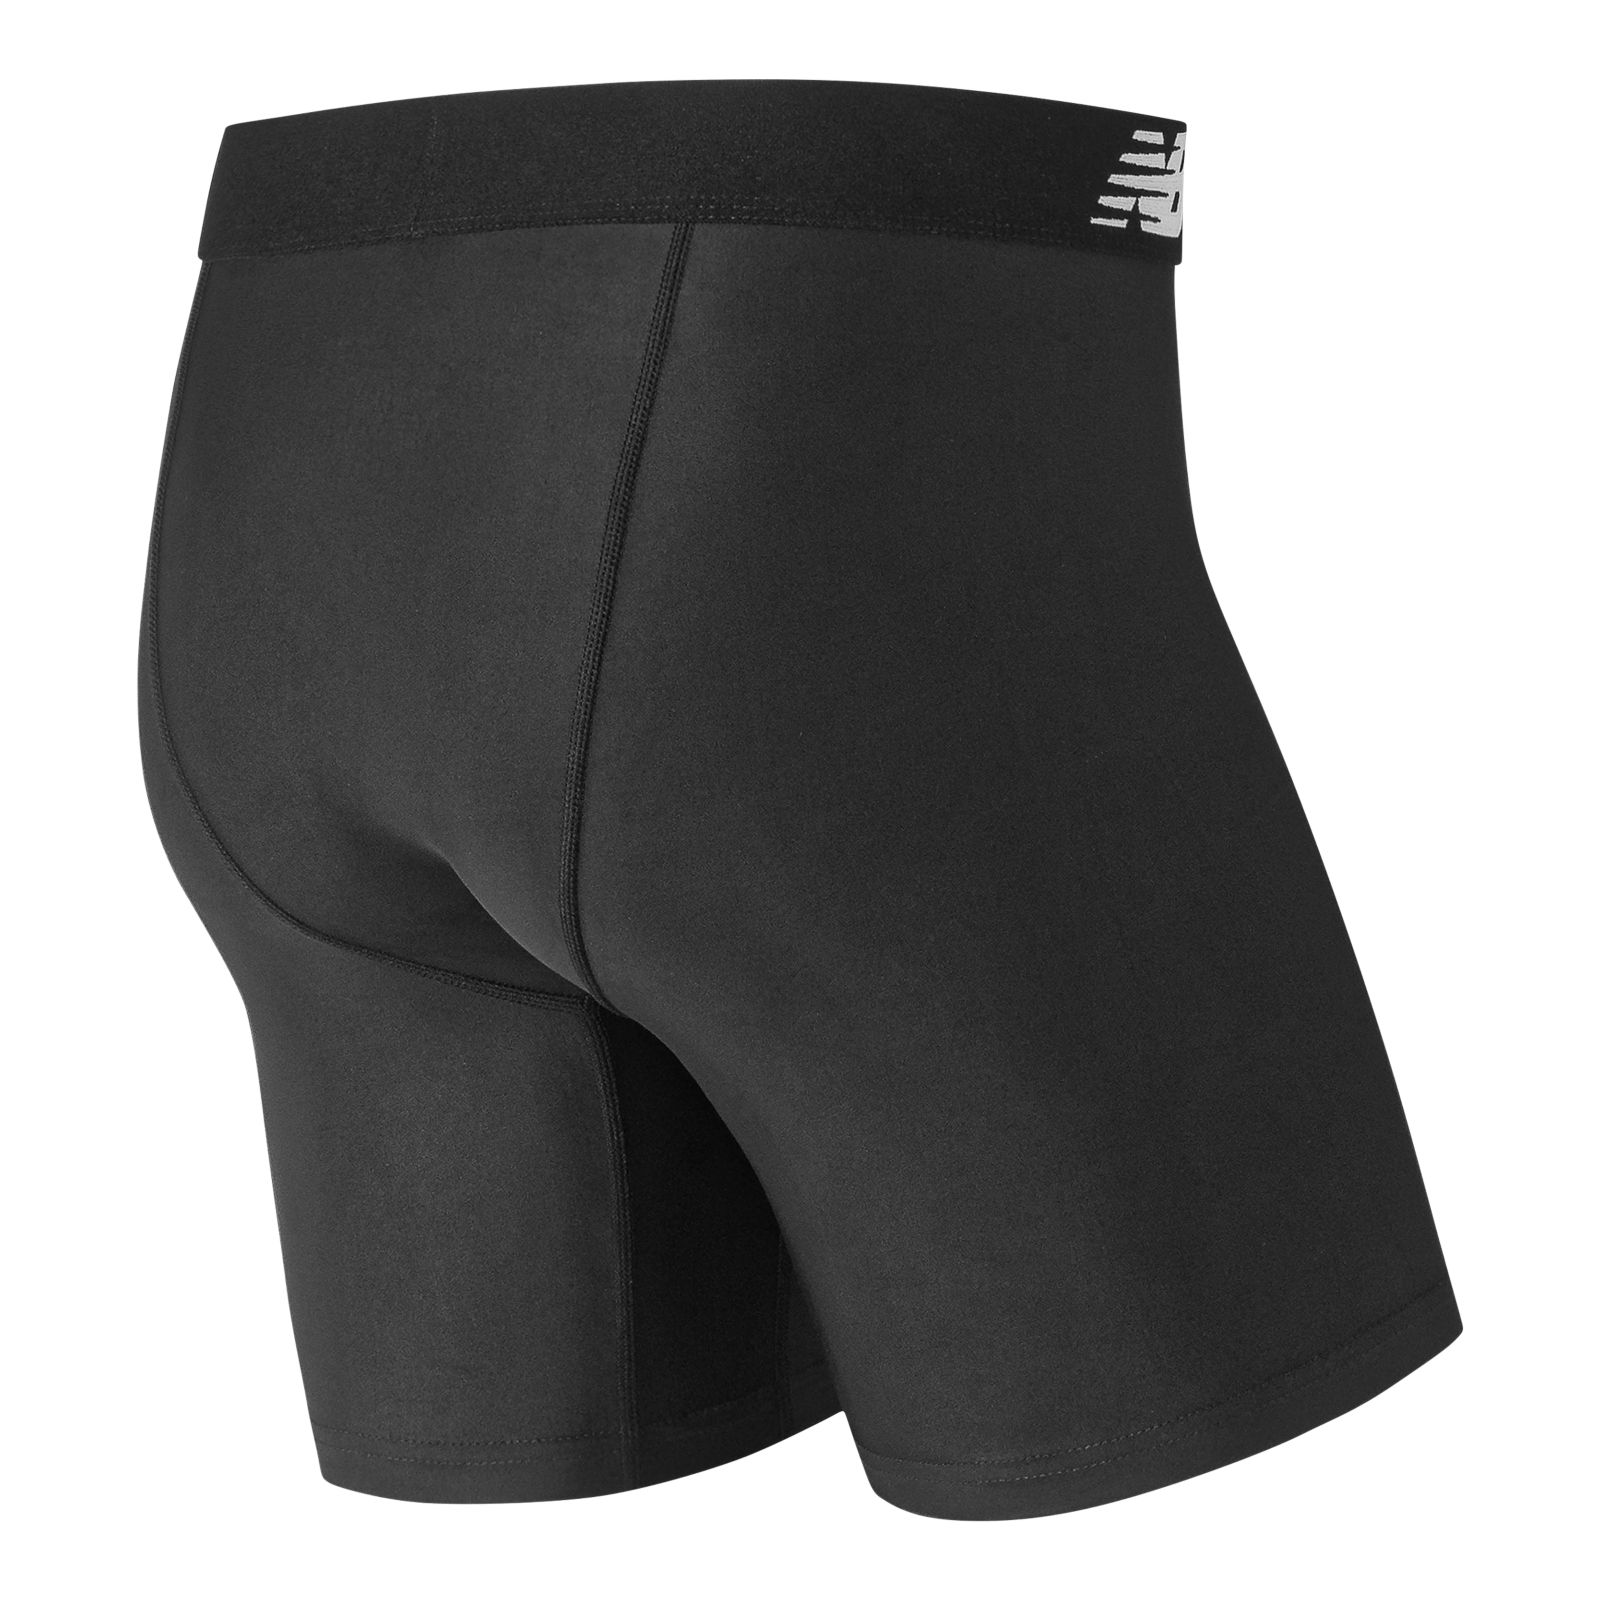 New Balance Men's Ultra Soft Performance 6″ Boxer Briefs with No